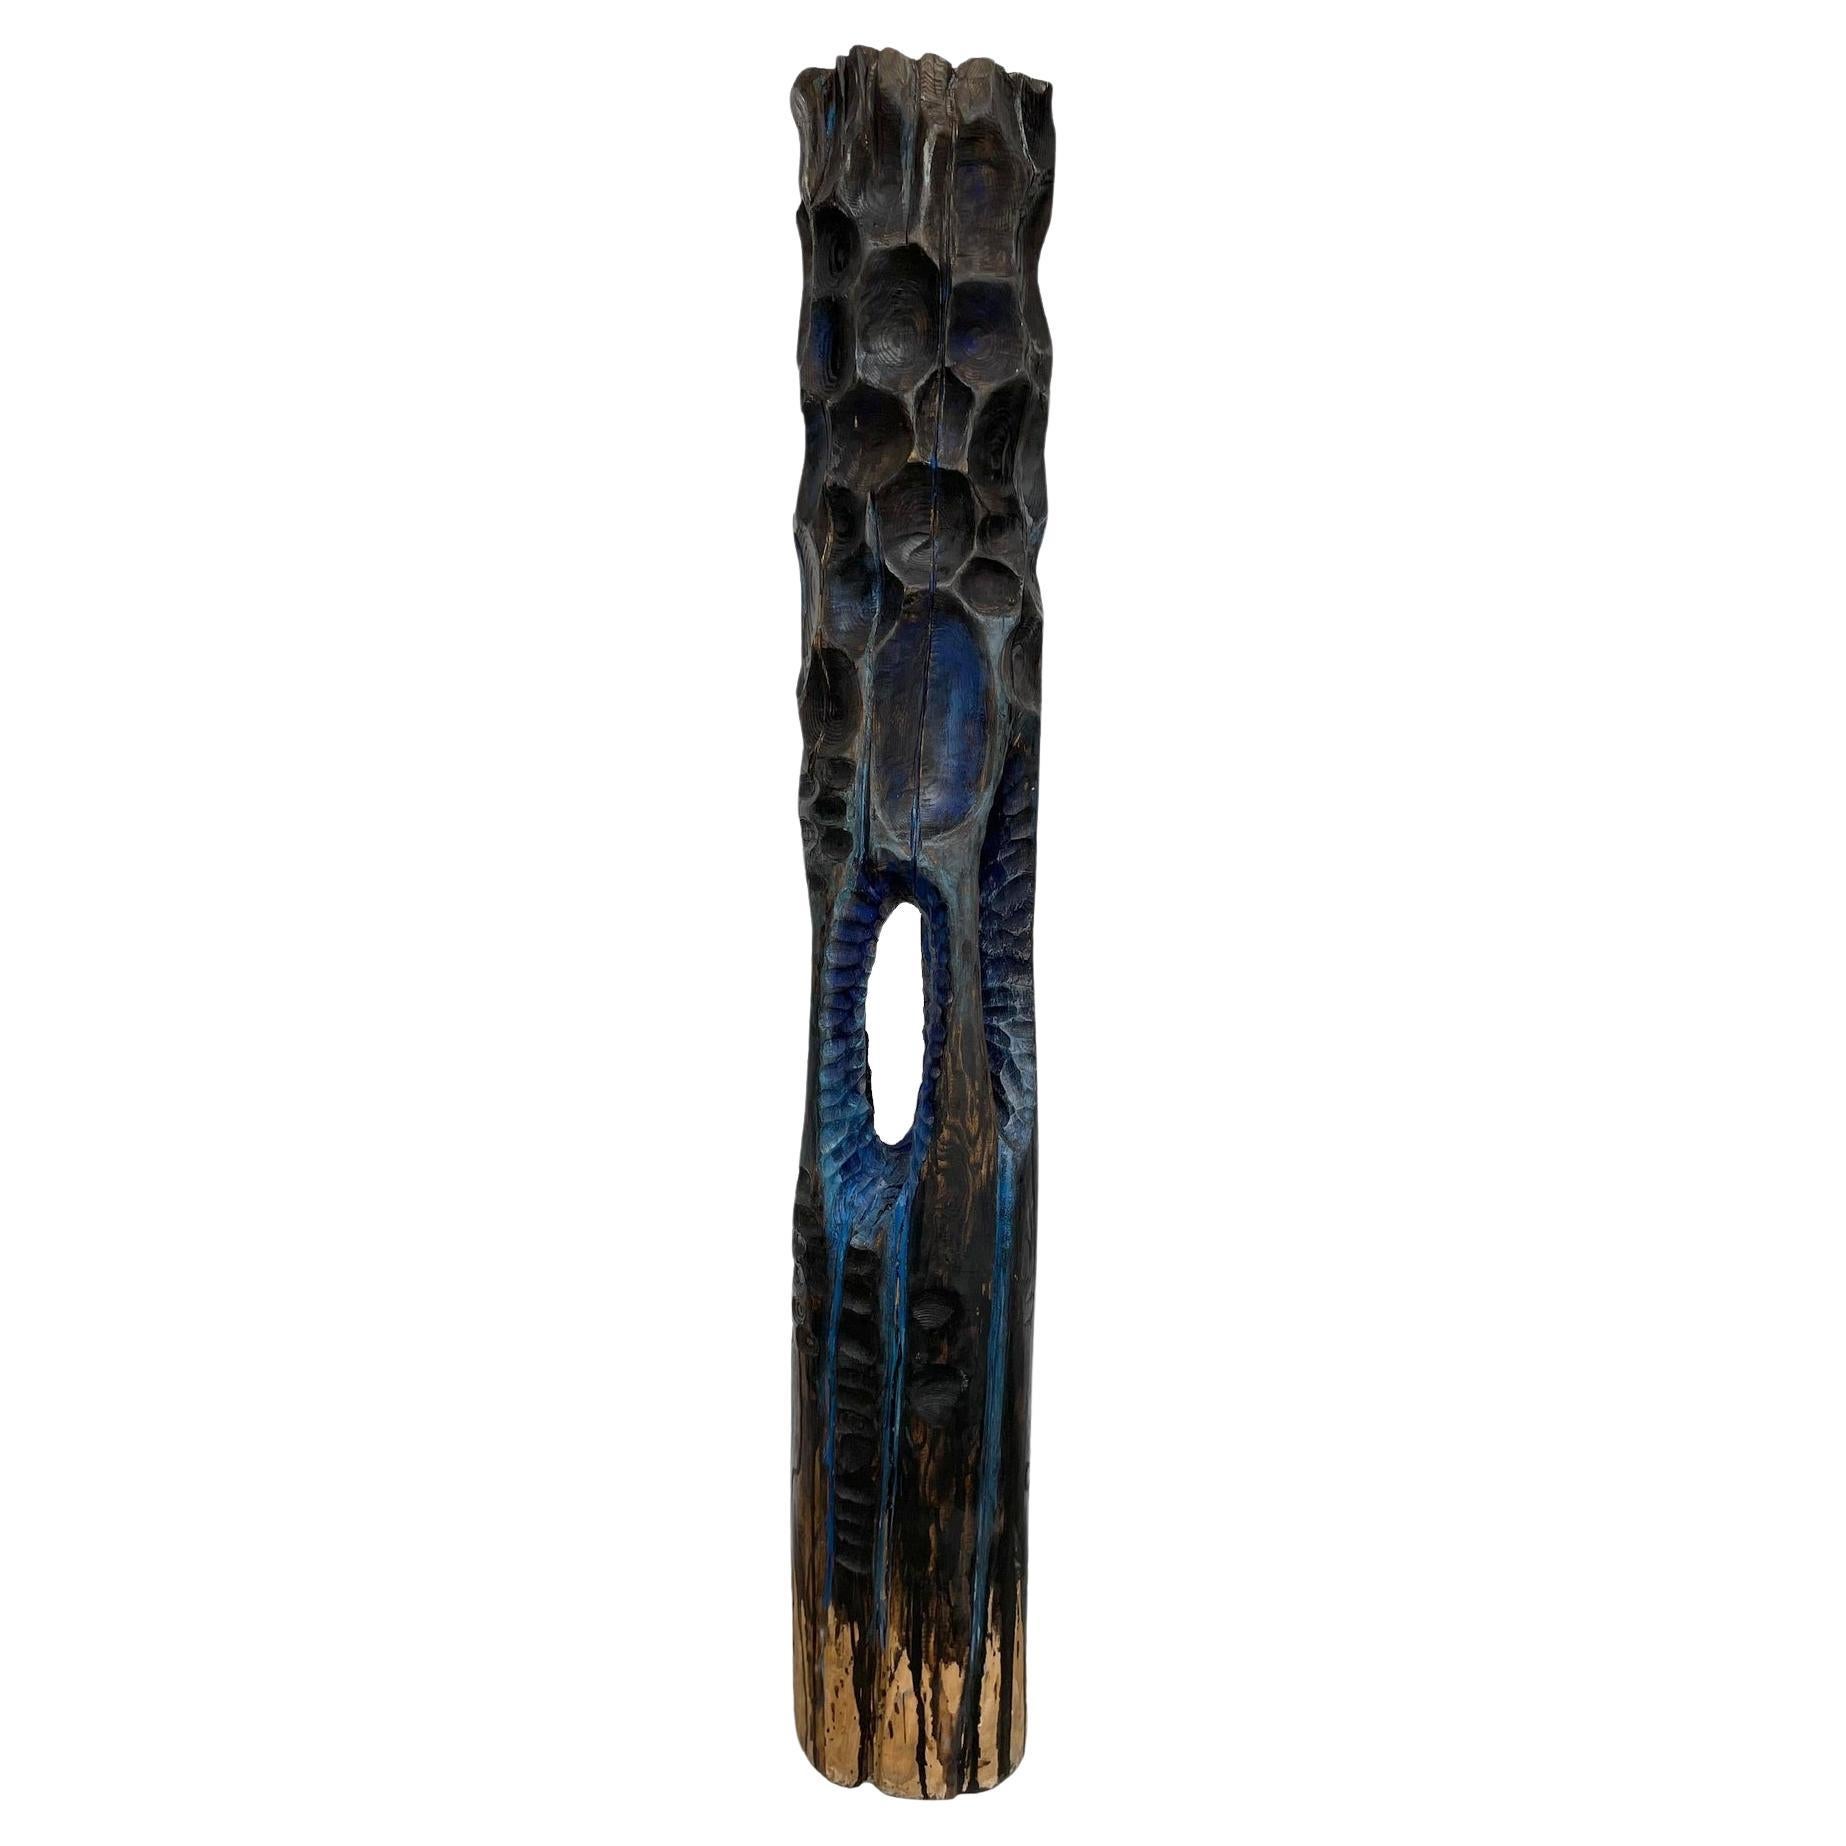 Sculpture "Totem" in wood with blue patina For Sale